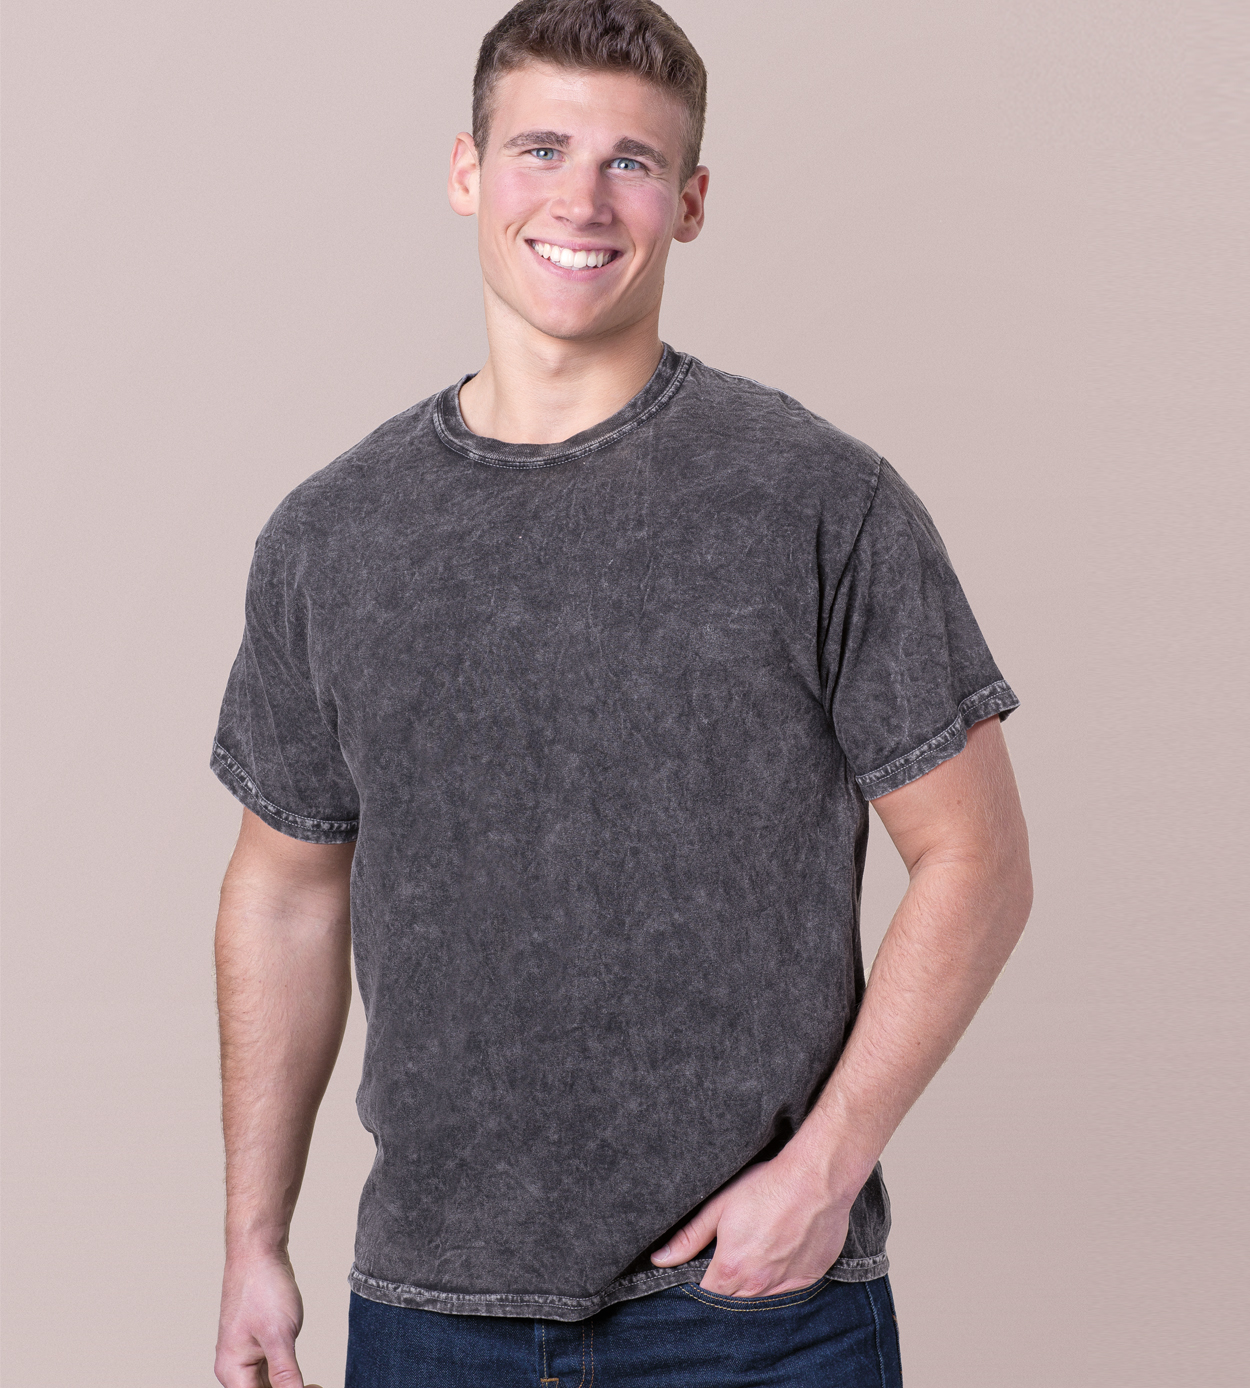 https://www.nyfifth.com/category/20160911/colortone-mineral-wash-tee_1455-T1300.jpg